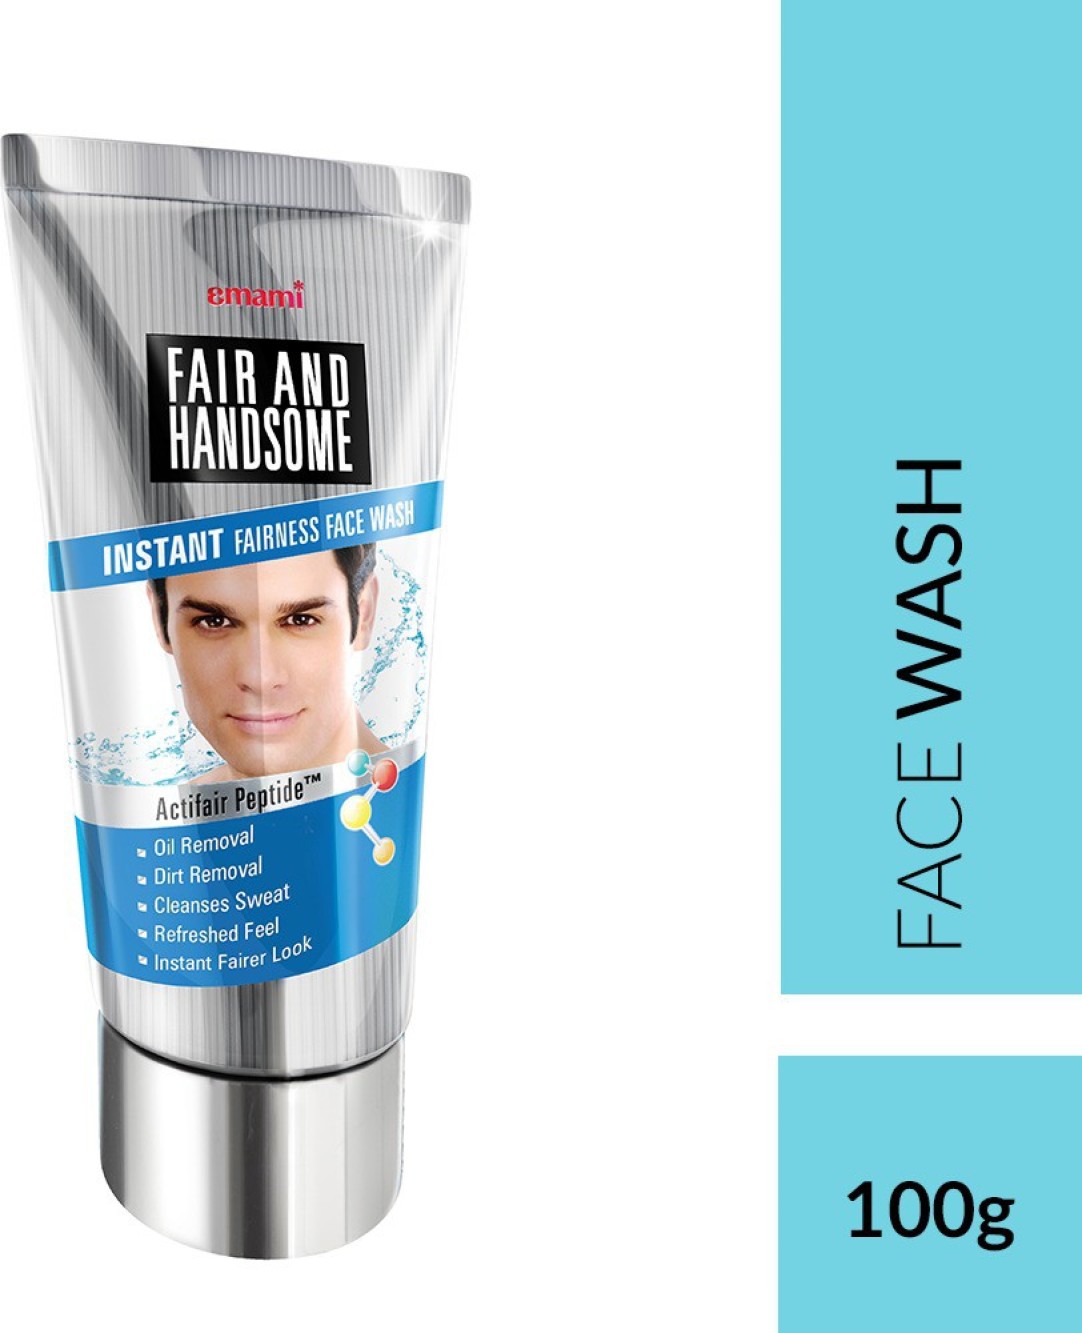 Fair and Handsome Instant Fairness Face Wash, 100g